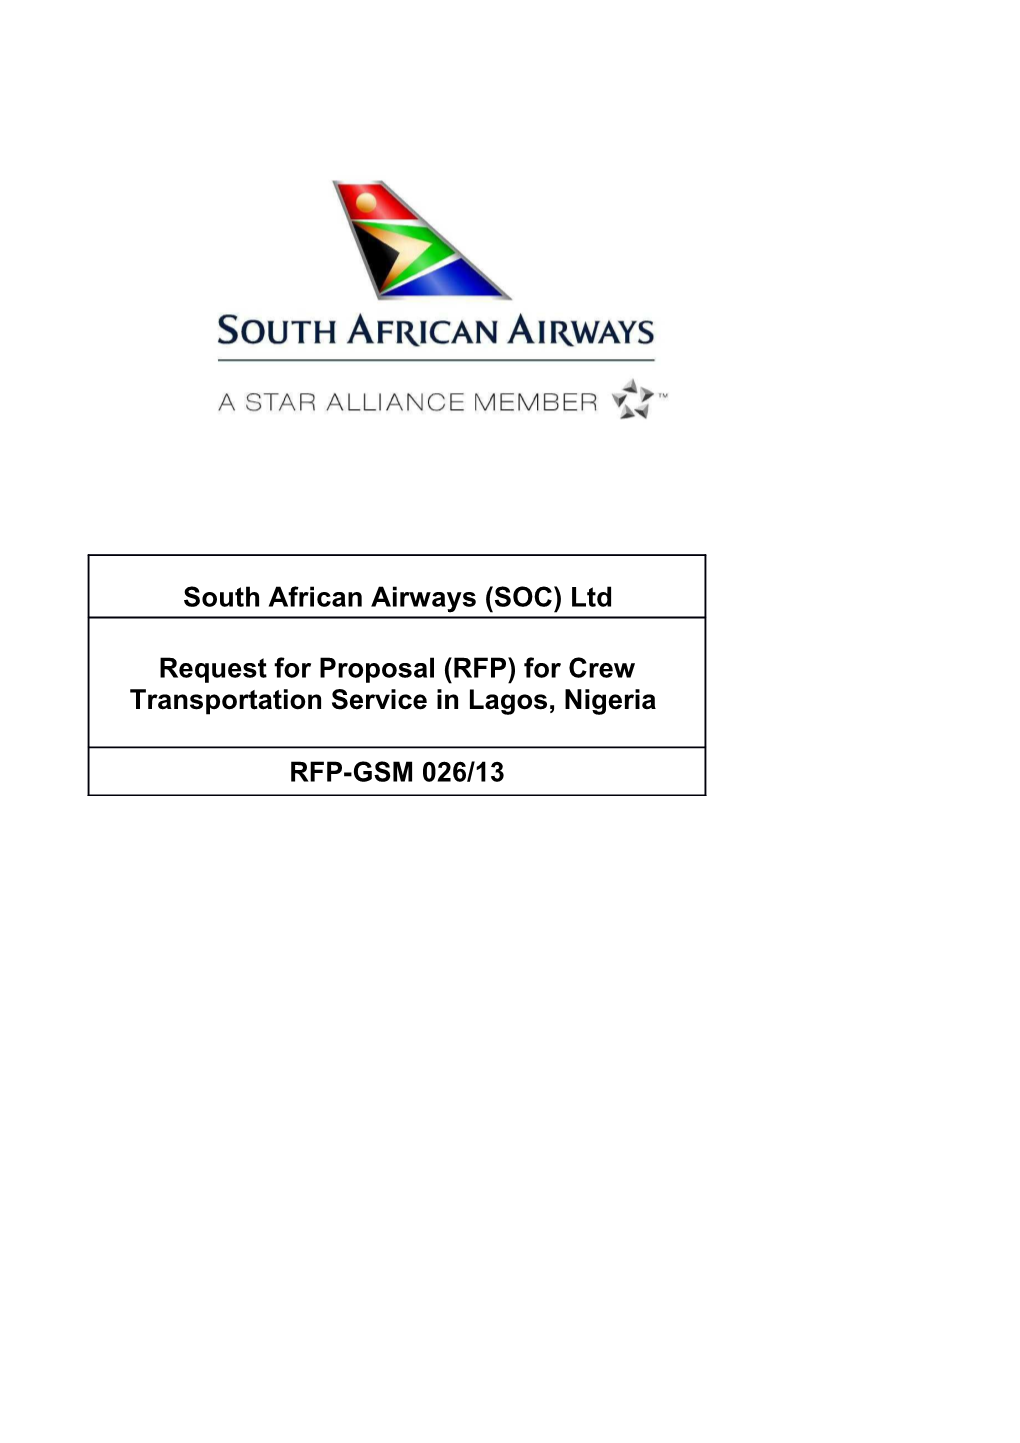 South African Airways (Proprietary) Limited